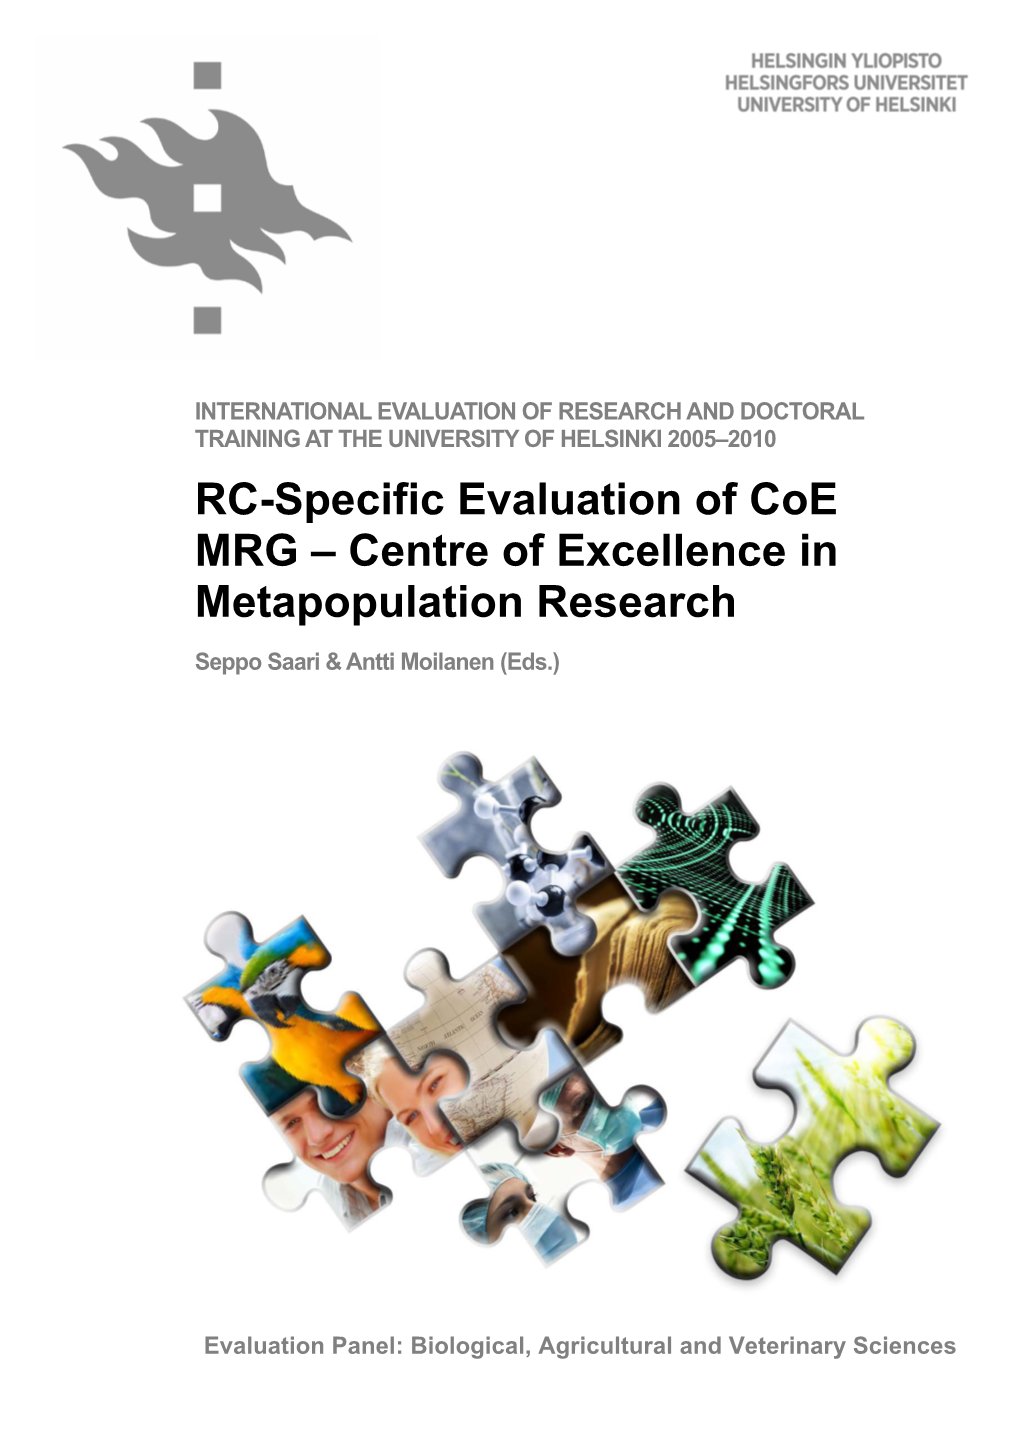 RC-Specific Evaluation of Coe MRG – Centre of Excellence in Metapopulation Research Seppo Saari & Antti Moilanen (Eds.)